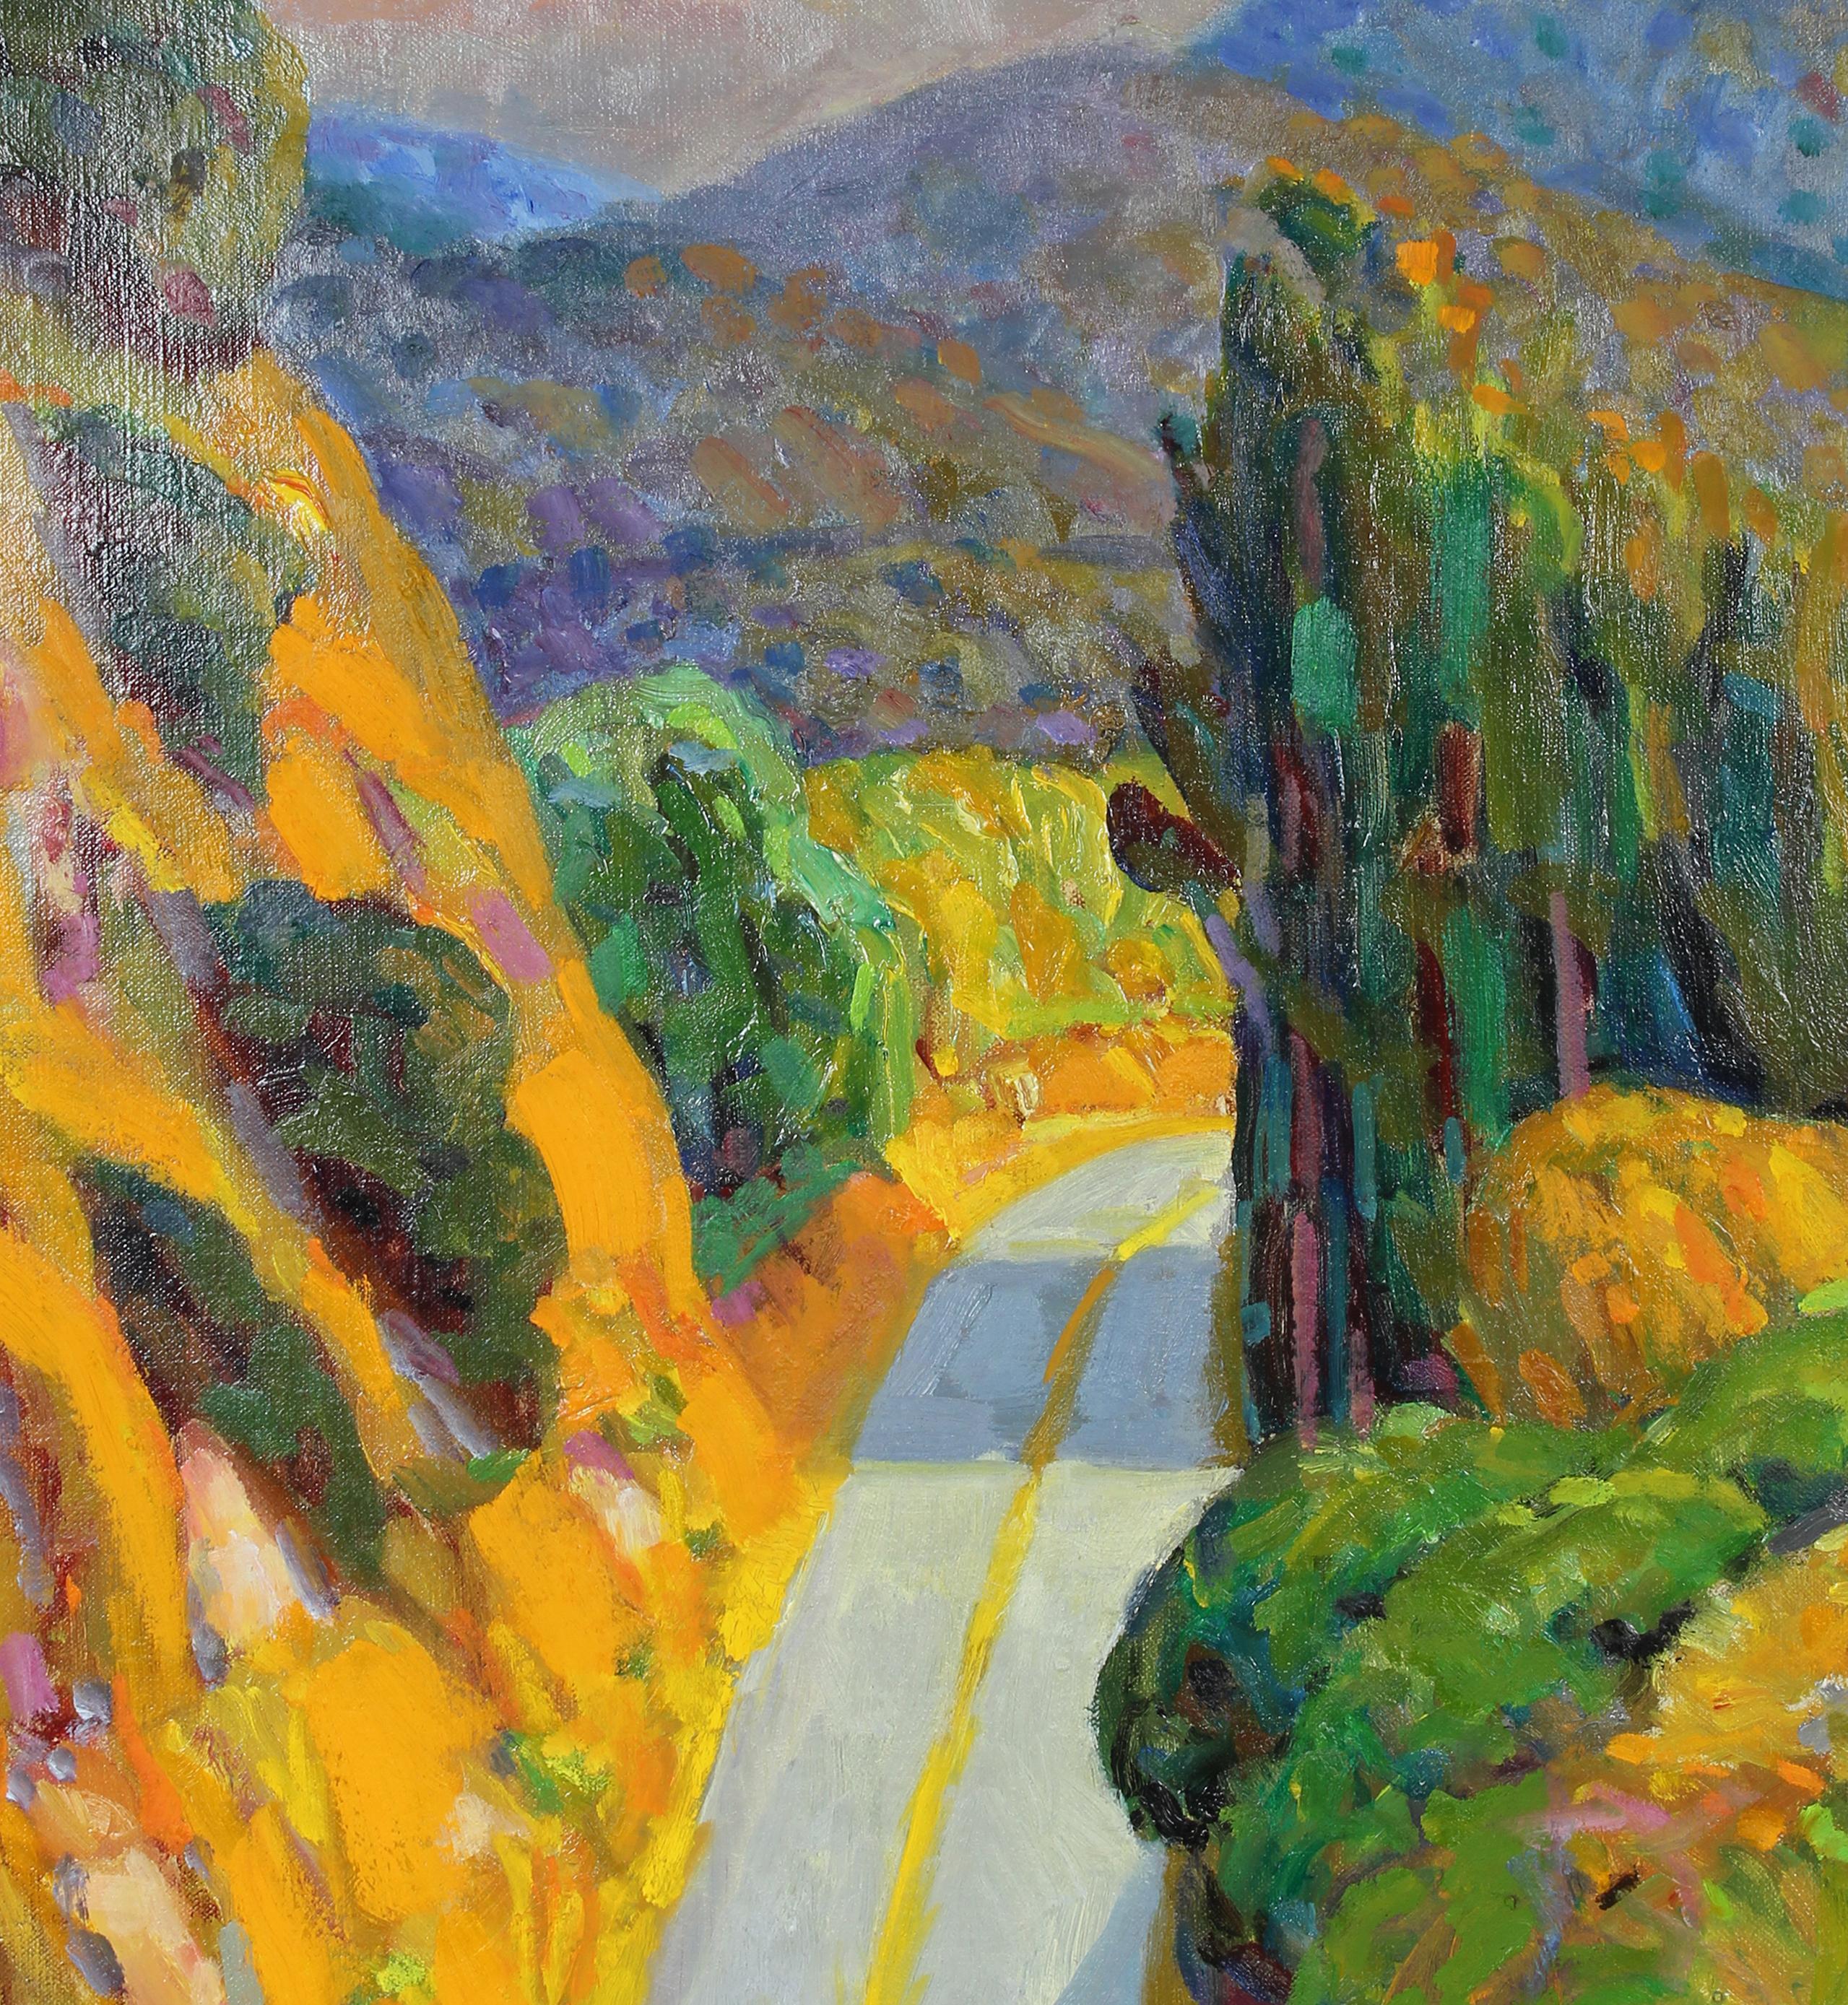 Colorful Oil on Canvas Carmel Valley Landscape with Mountains, Trees and Road - Painting by Frederick Pomeroy